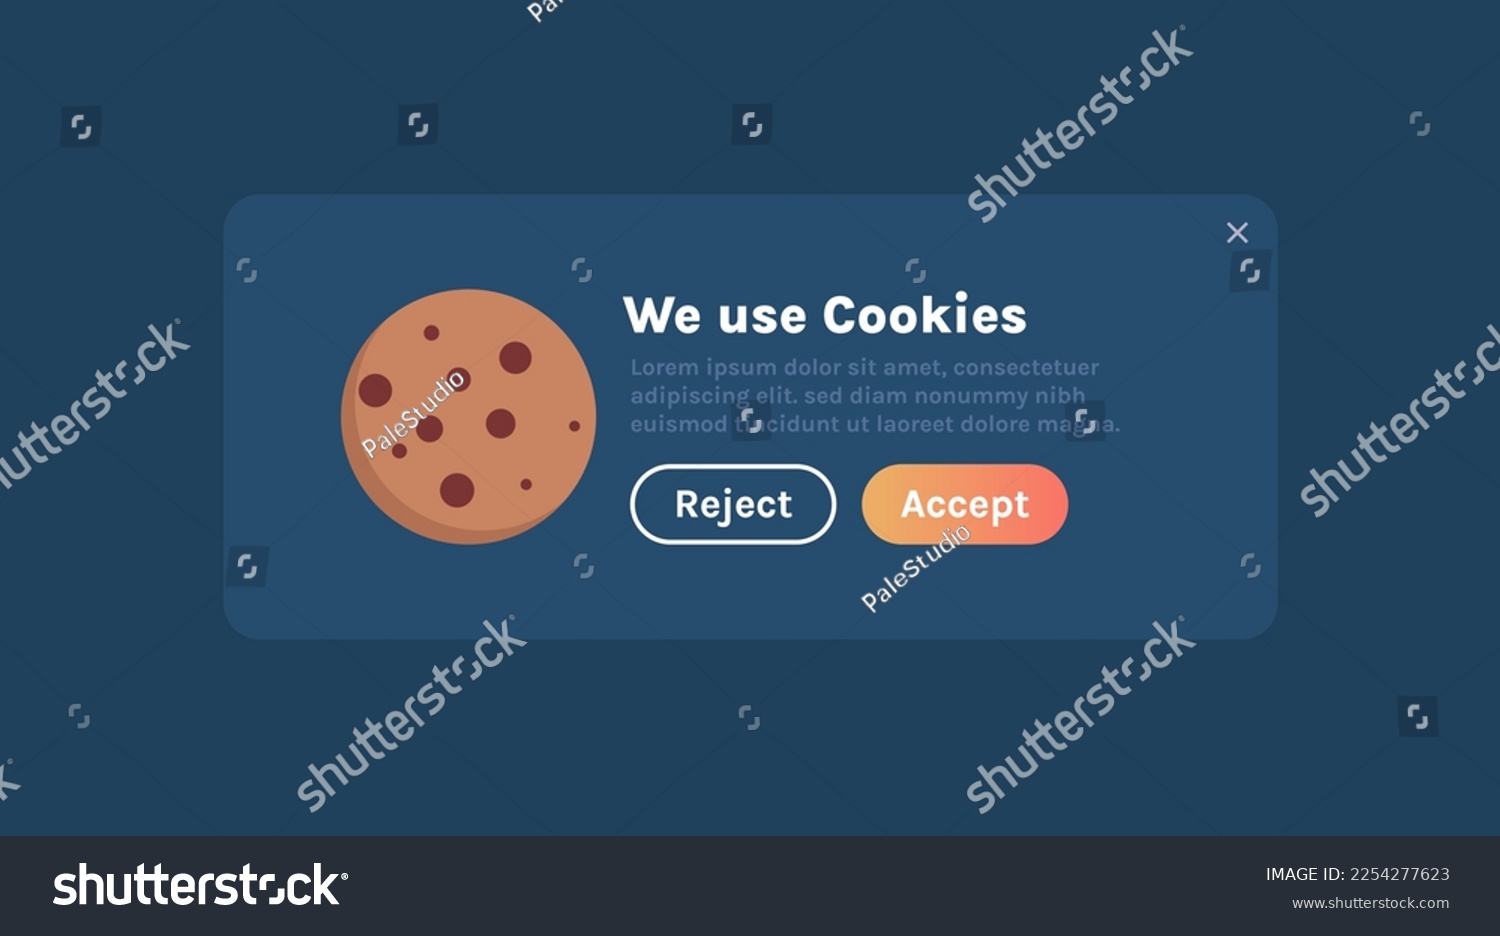 SVG of Protection of personal data information cookie and internet web page we use cookies policy concept flat vector illustration. svg